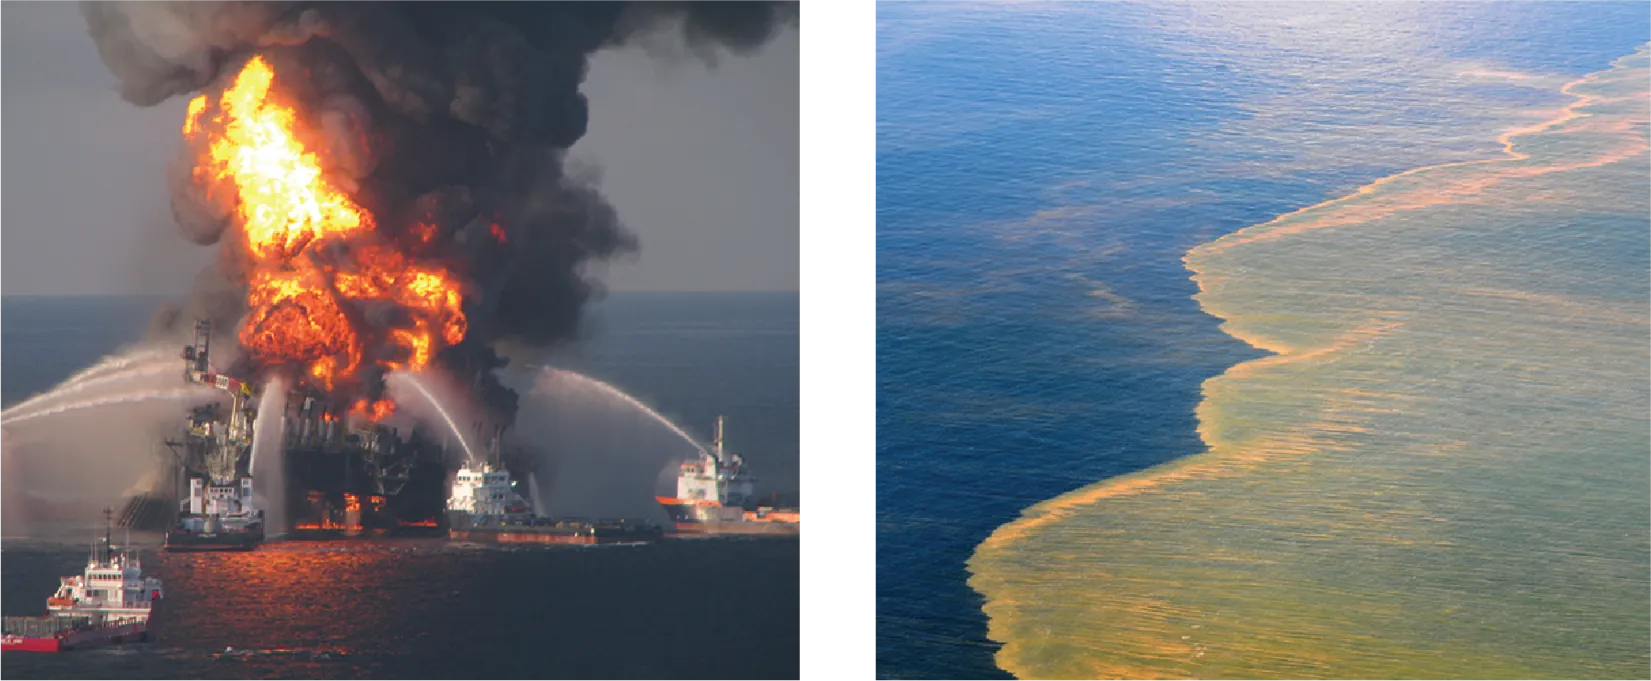 Left: The Deepwater Horizon oil rig on fire, surrounded with multiple ships spraying suppression materials. Right: Oil floating on the surface of water in the Gulf of Mexico.